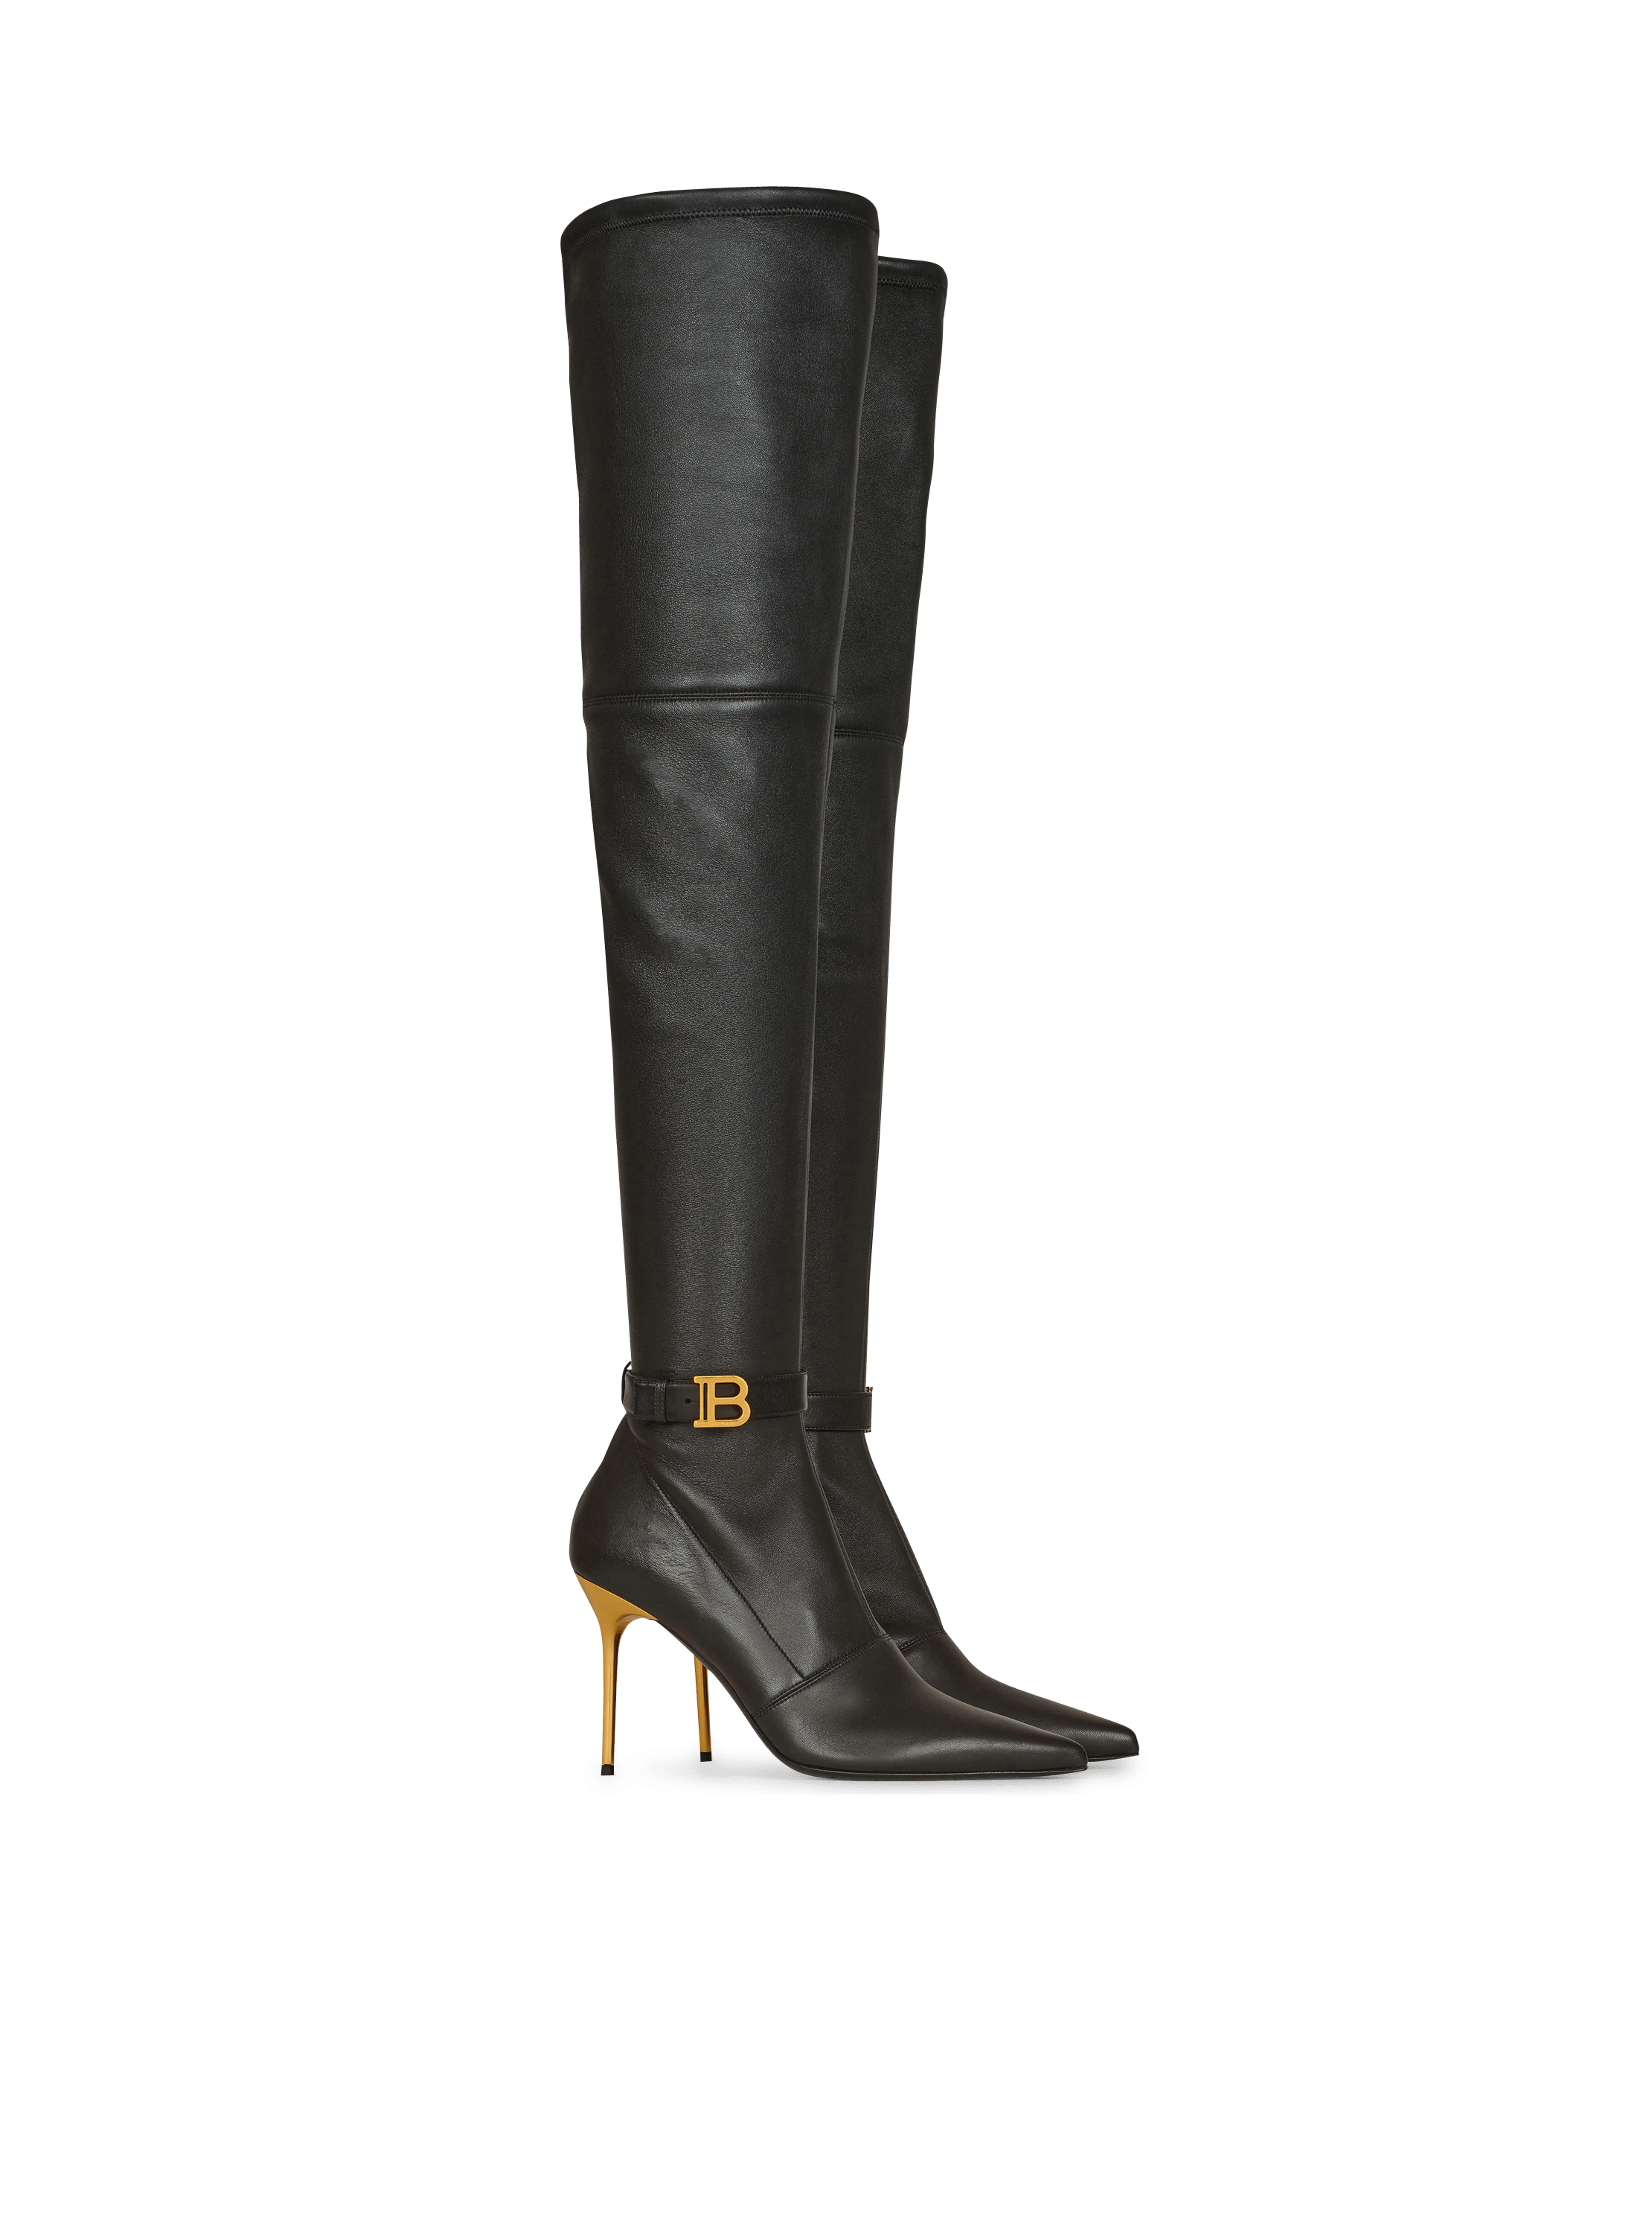 Affordable Glam: Thigh High Boots Inspired by Balmain